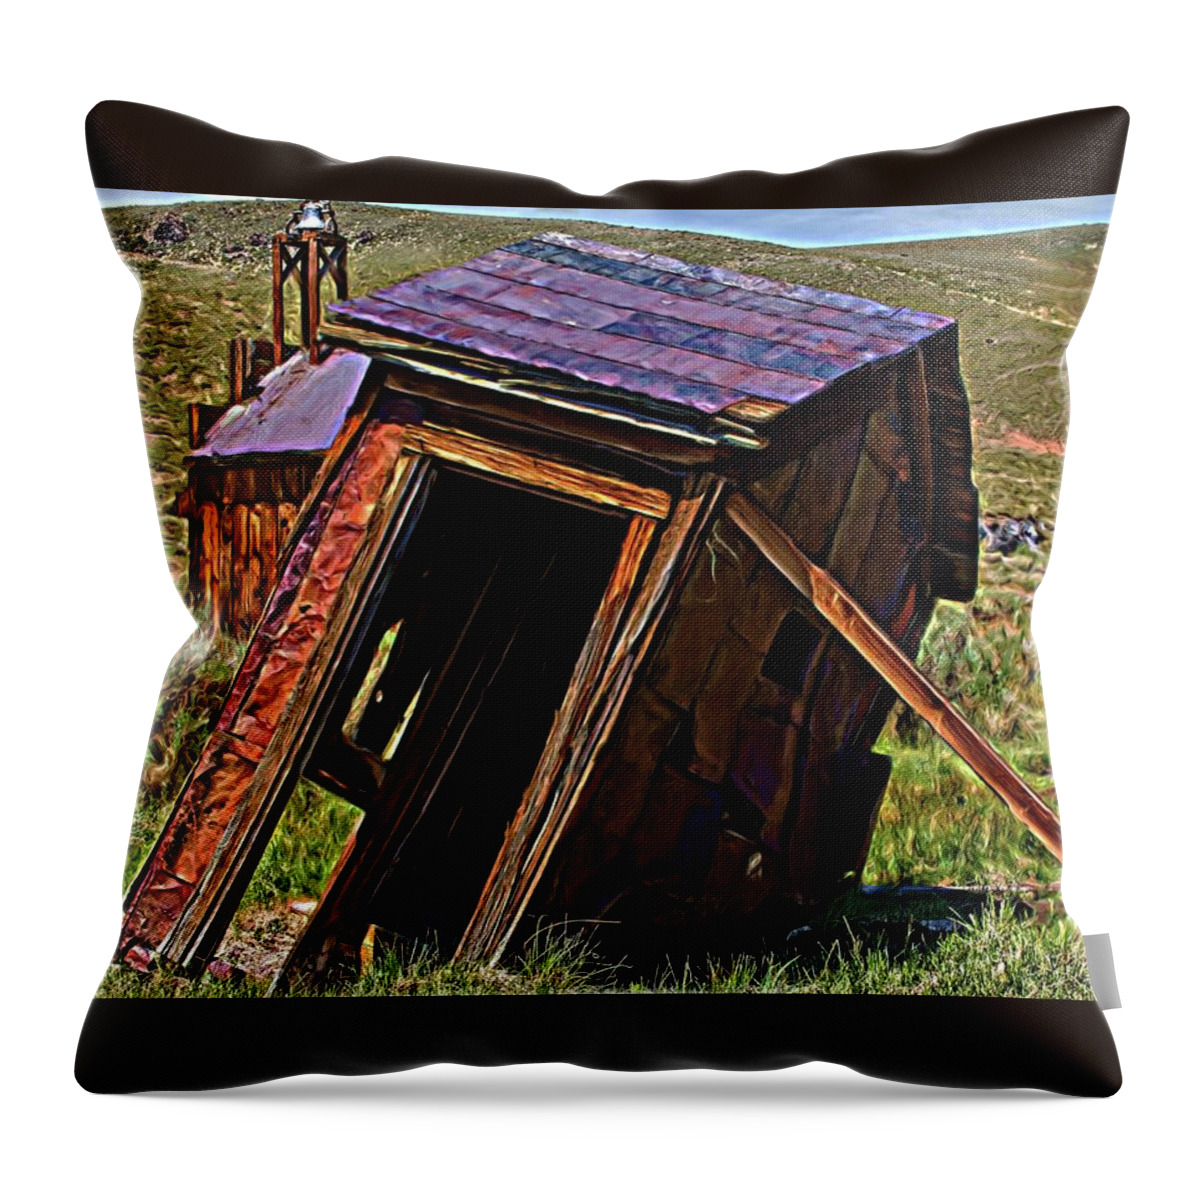 Abandoned Throw Pillow featuring the digital art The Leaning Outhouse Of Bodie by David Desautel